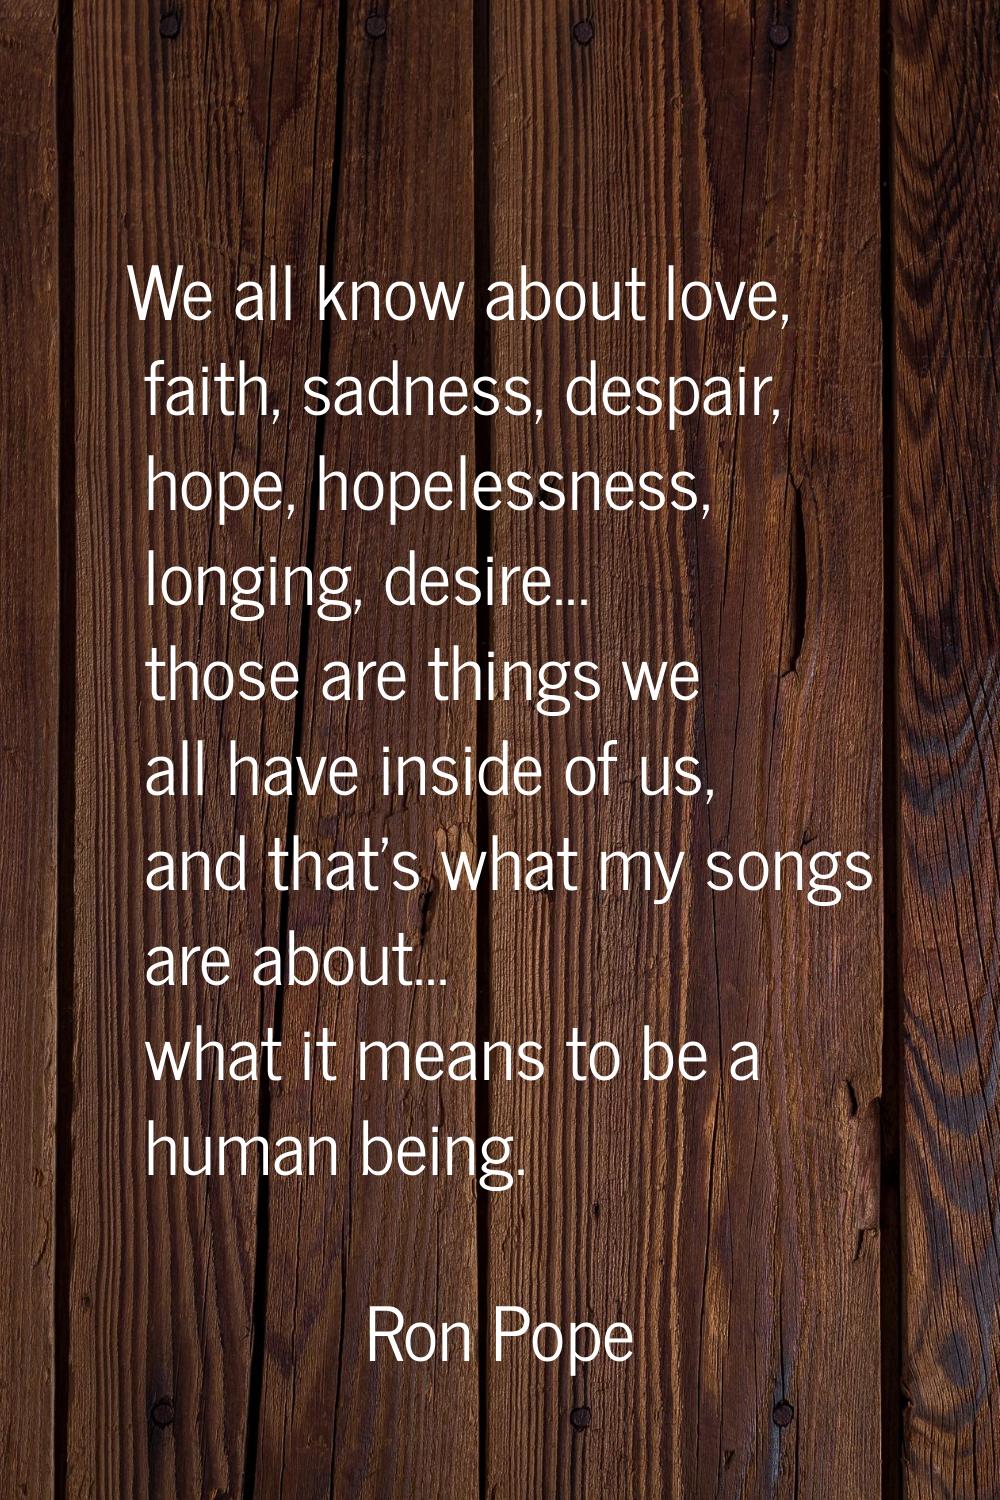 We all know about love, faith, sadness, despair, hope, hopelessness, longing, desire... those are t